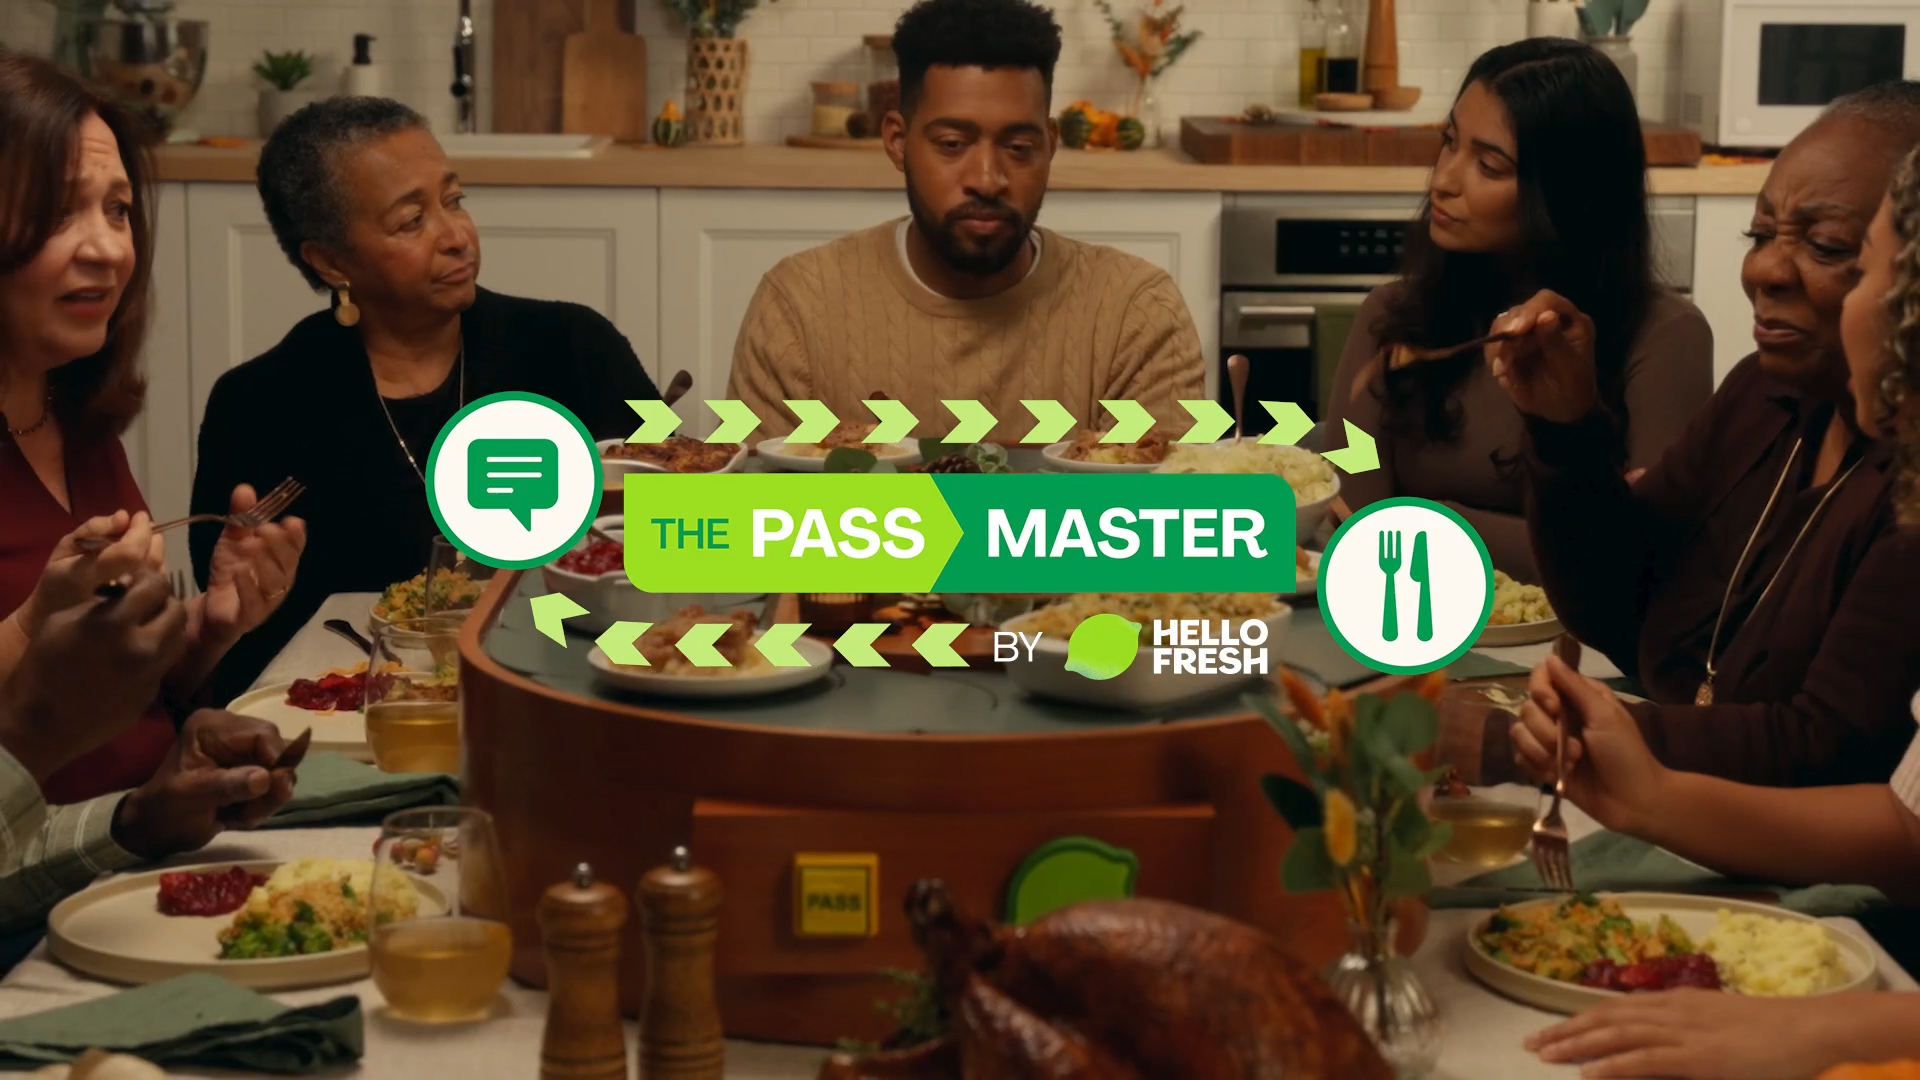 The Pass Master is an innovative and eye-catching centerpiece that seamlessly passes beloved Thanksgiving Day foods around the table, while also giving guests the option to click on a verbal “pass” button to avoid those inevitable awkward conversations!